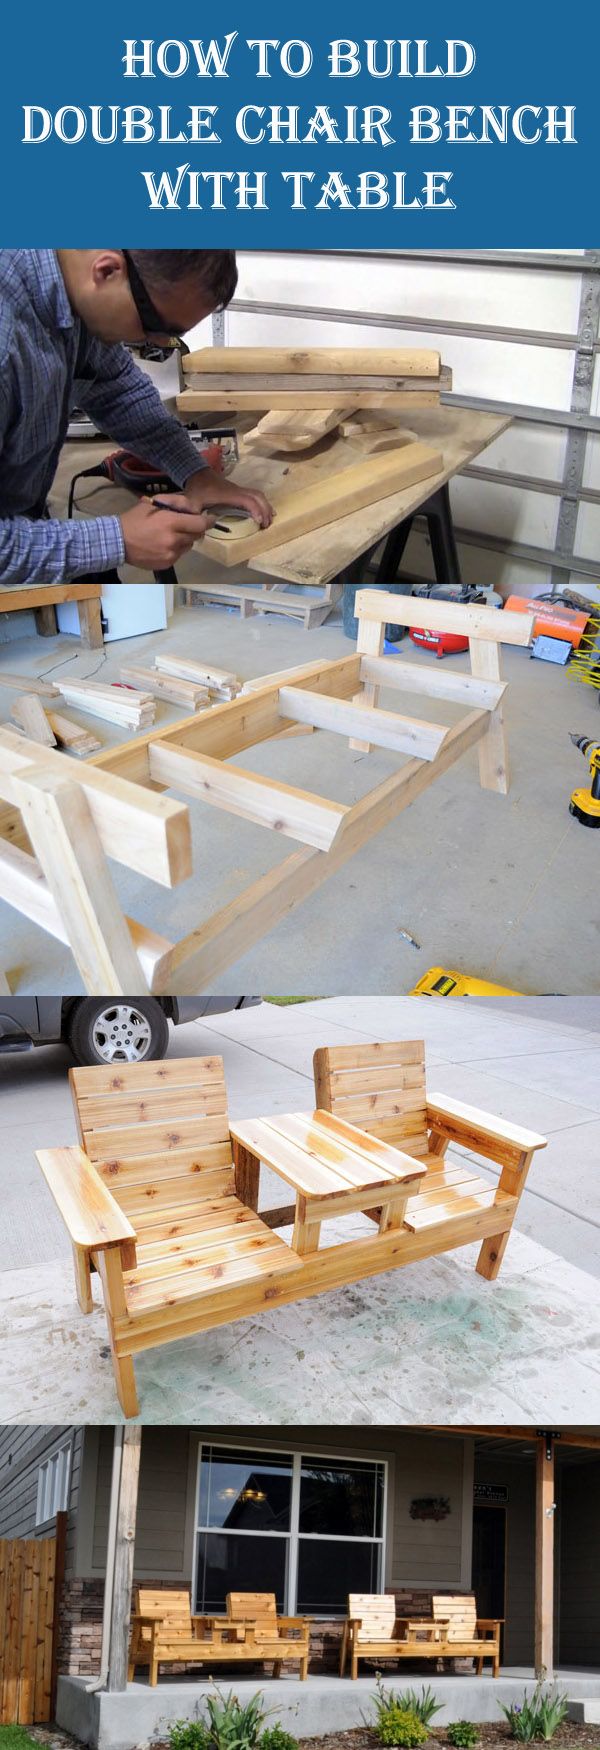 DIY Double Chair Bench with Table